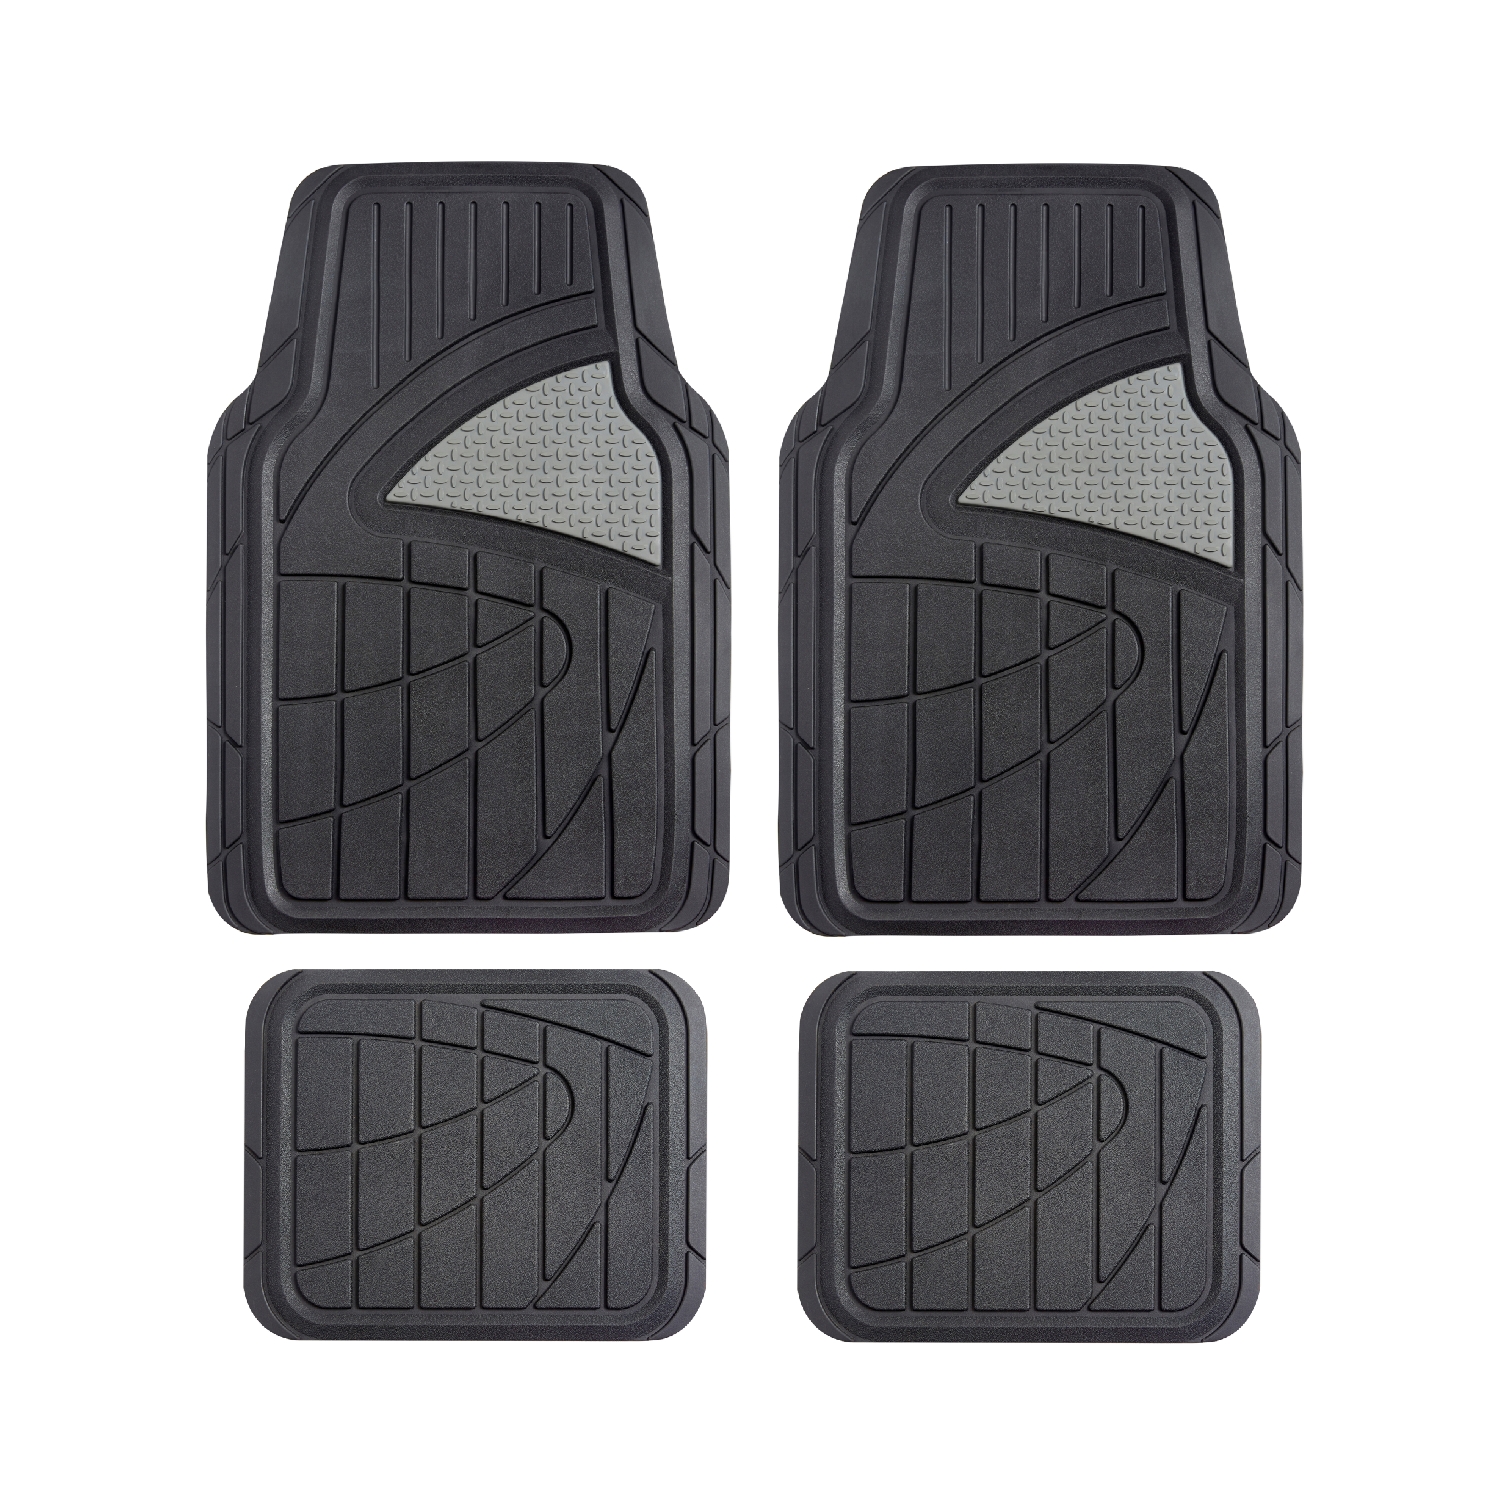 Deluxe universal 4pc car flooring mat Two-tone